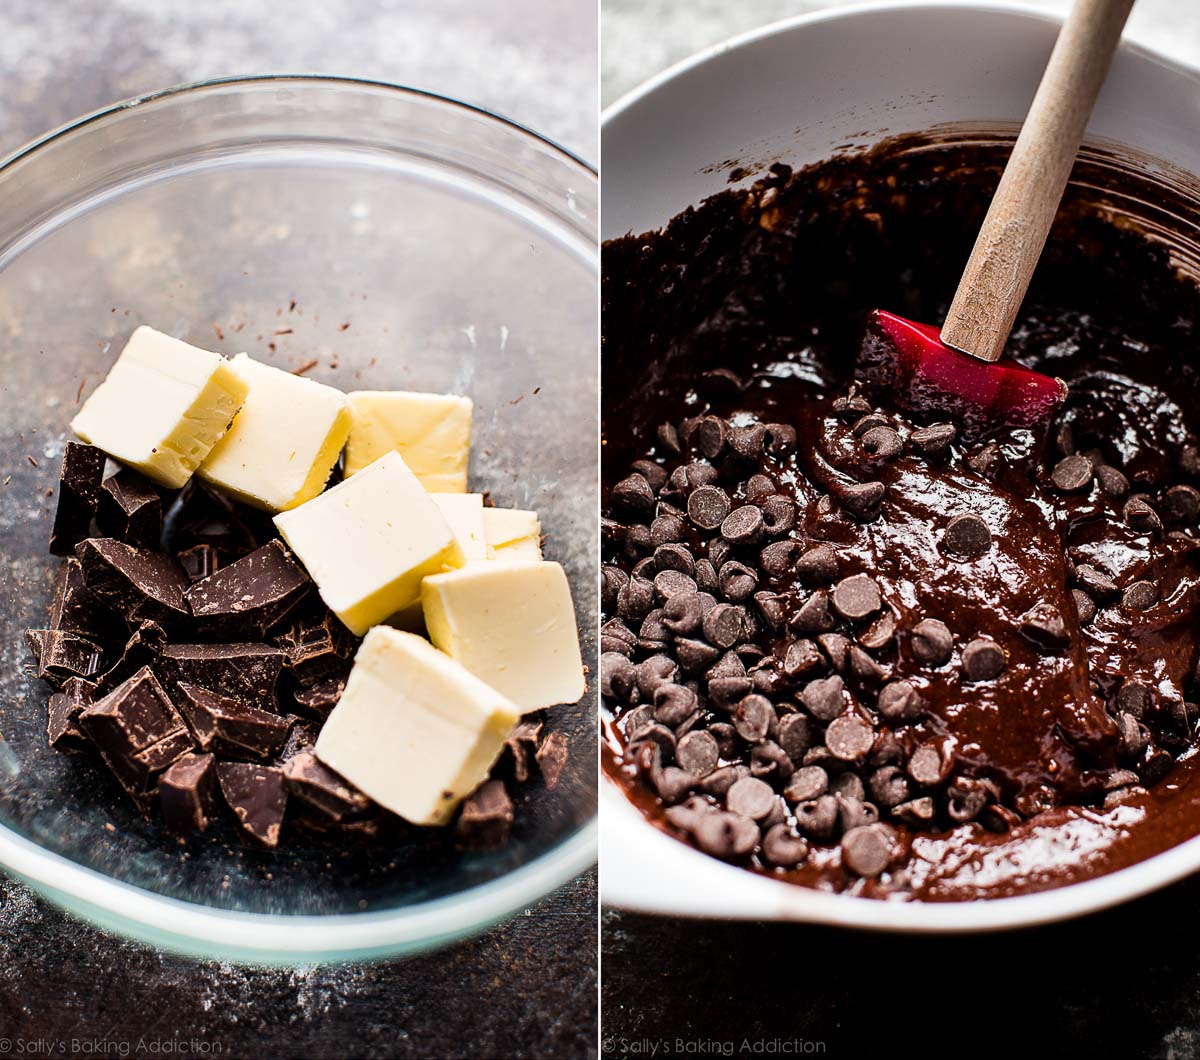 2 images of butter and chocolate chunks in a glass bowl and chocolate muffin batter with chocolate chips in a white bowl